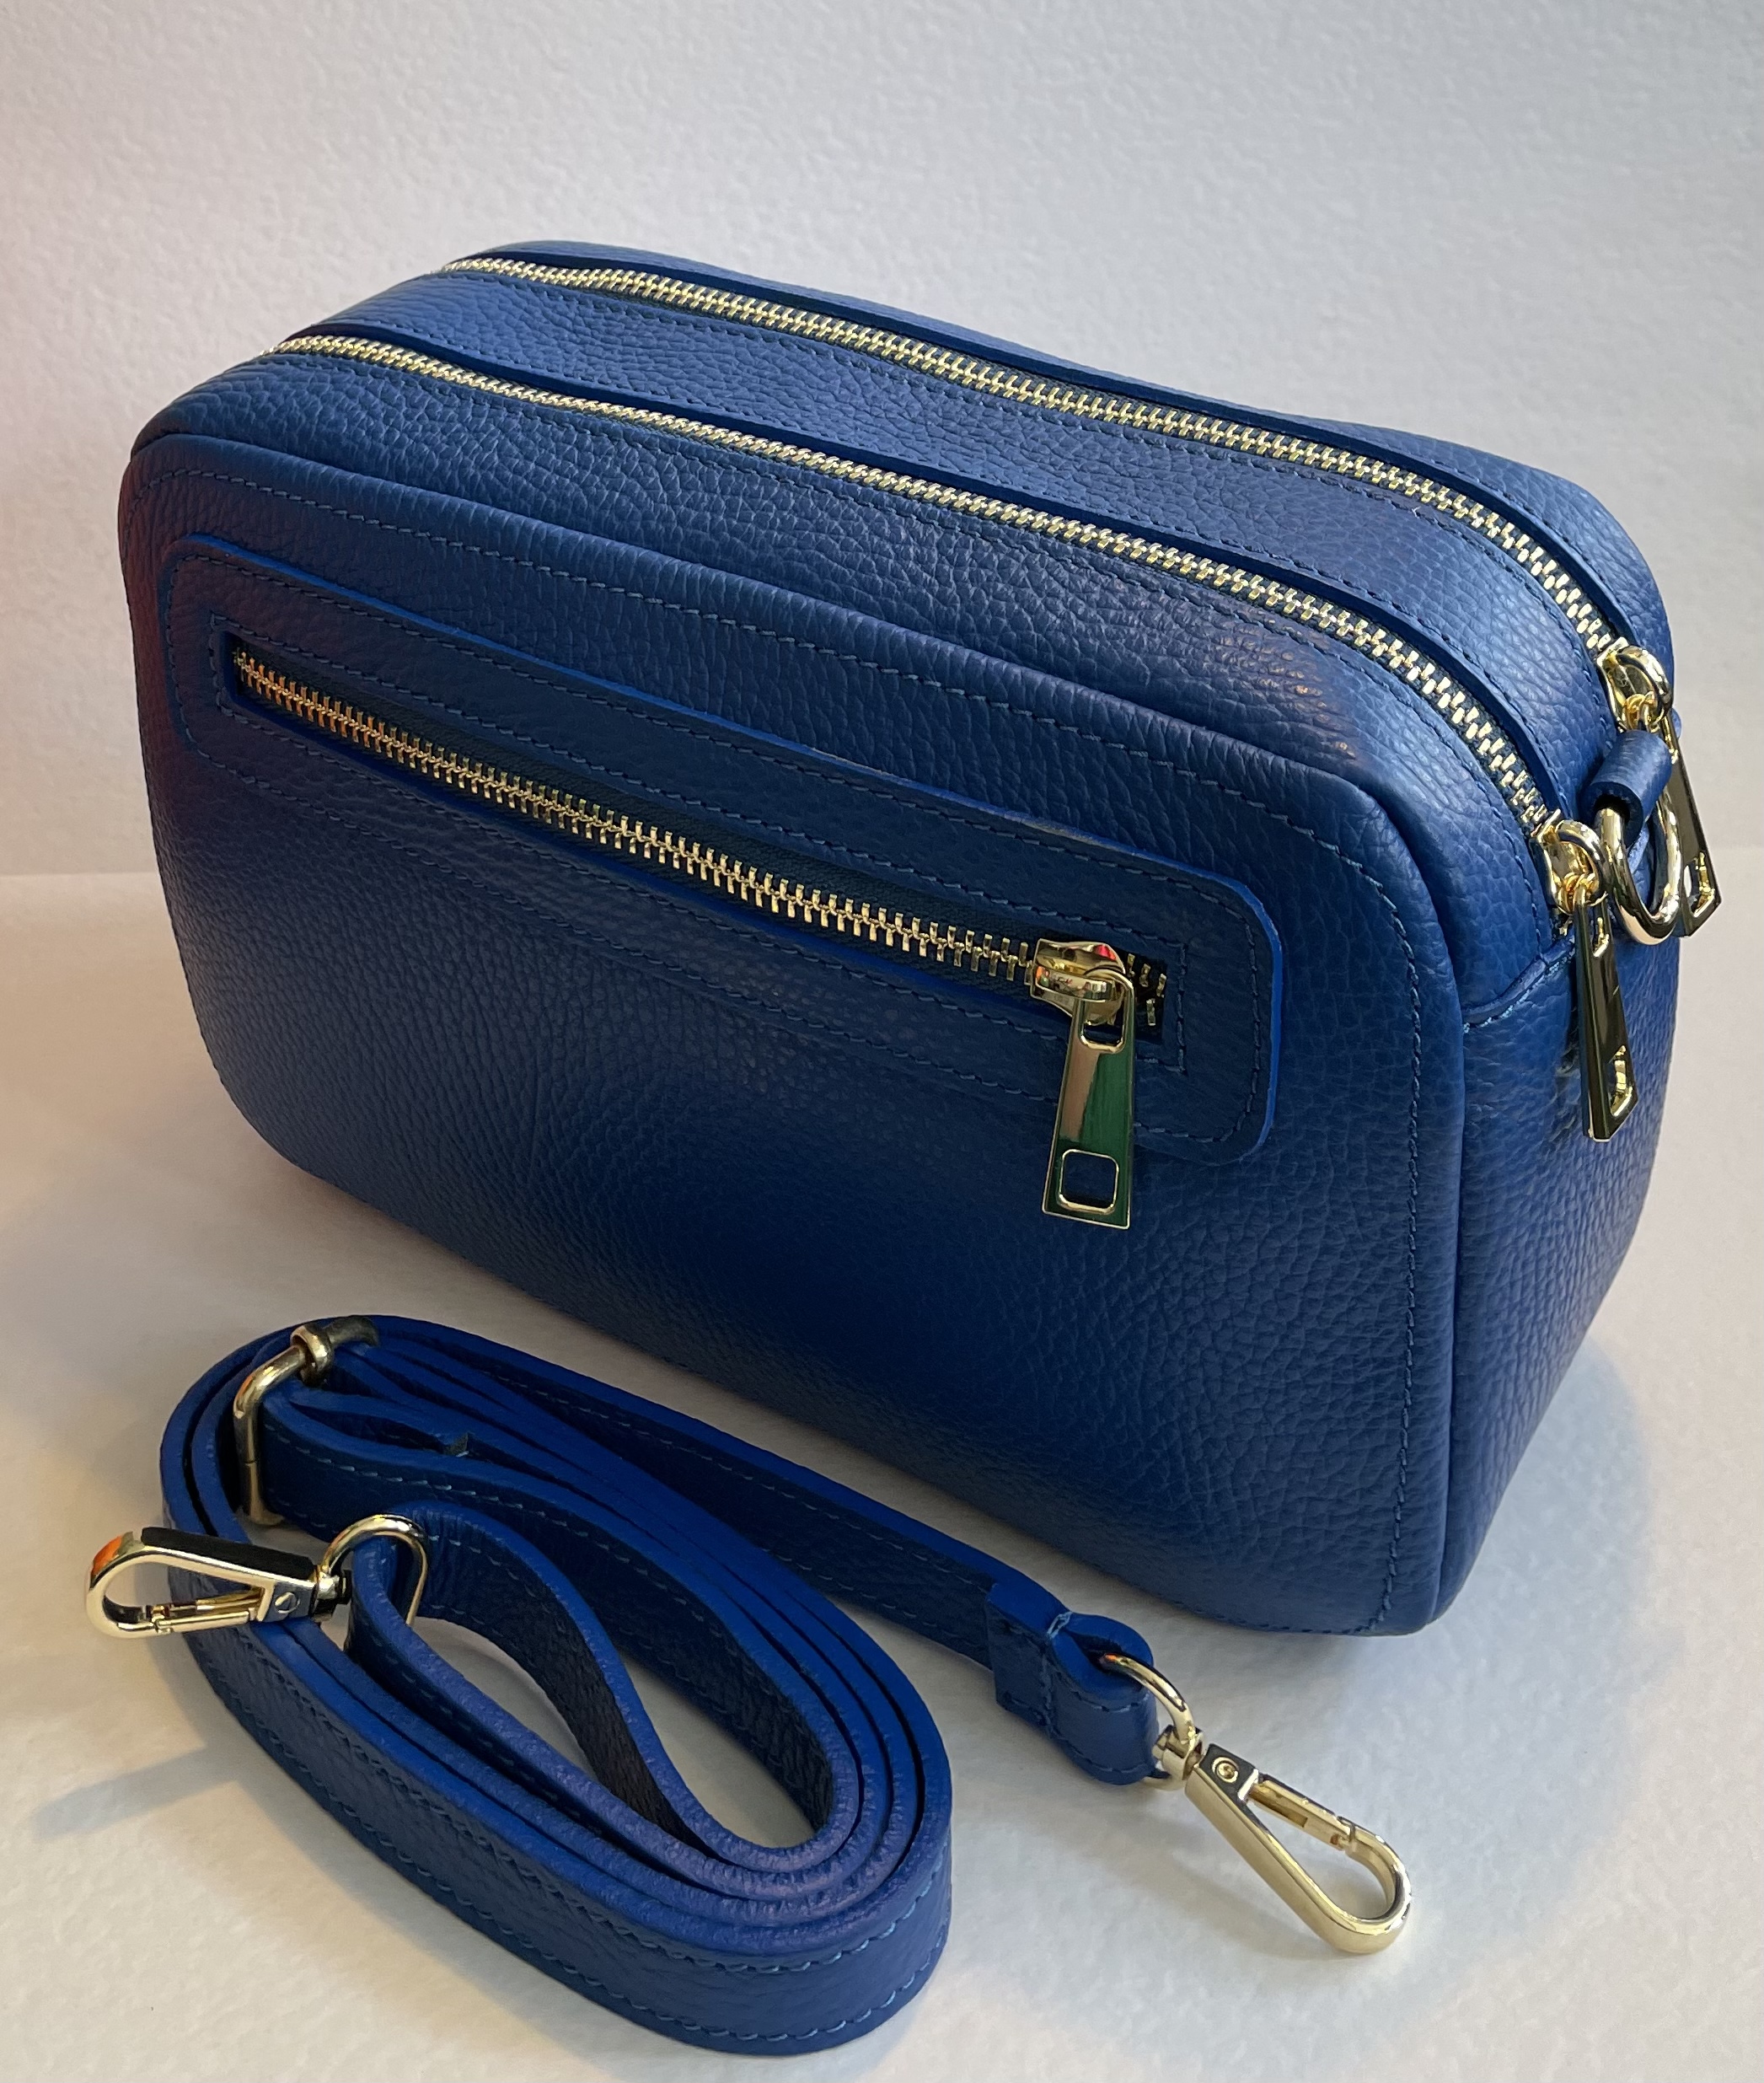 Small Italian Leather Duo Strap Bag Royal Blue for Hilly Horton